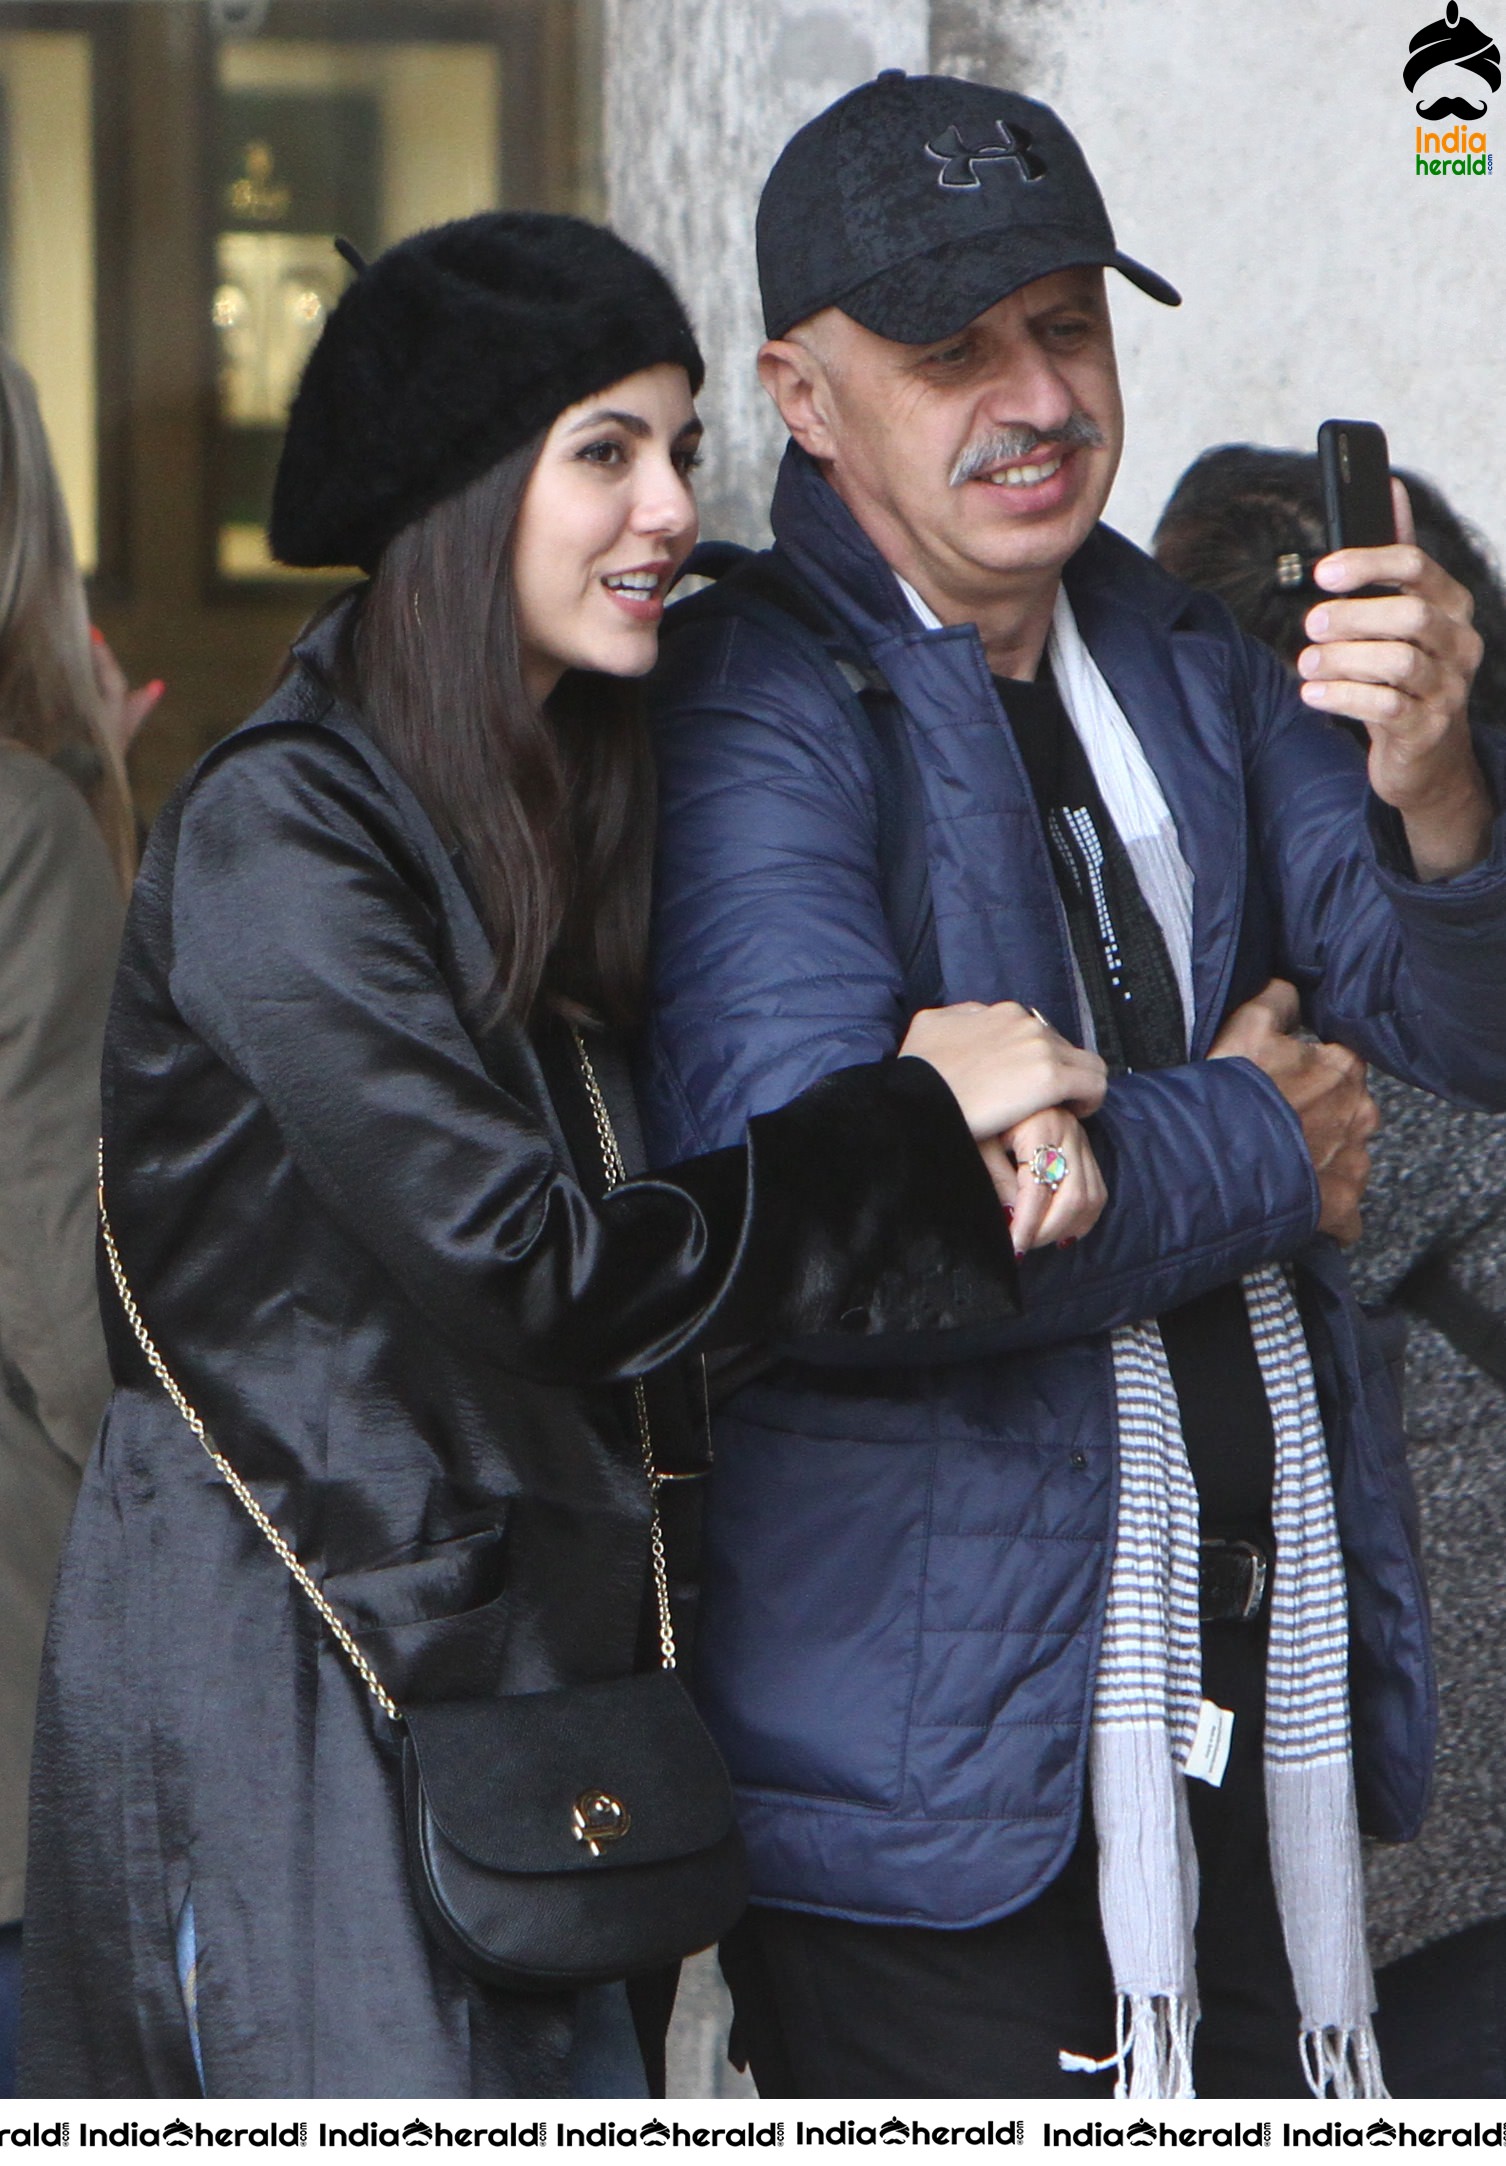 Victoria Justice takes Photos with fans by Road Side and fulfil their desires